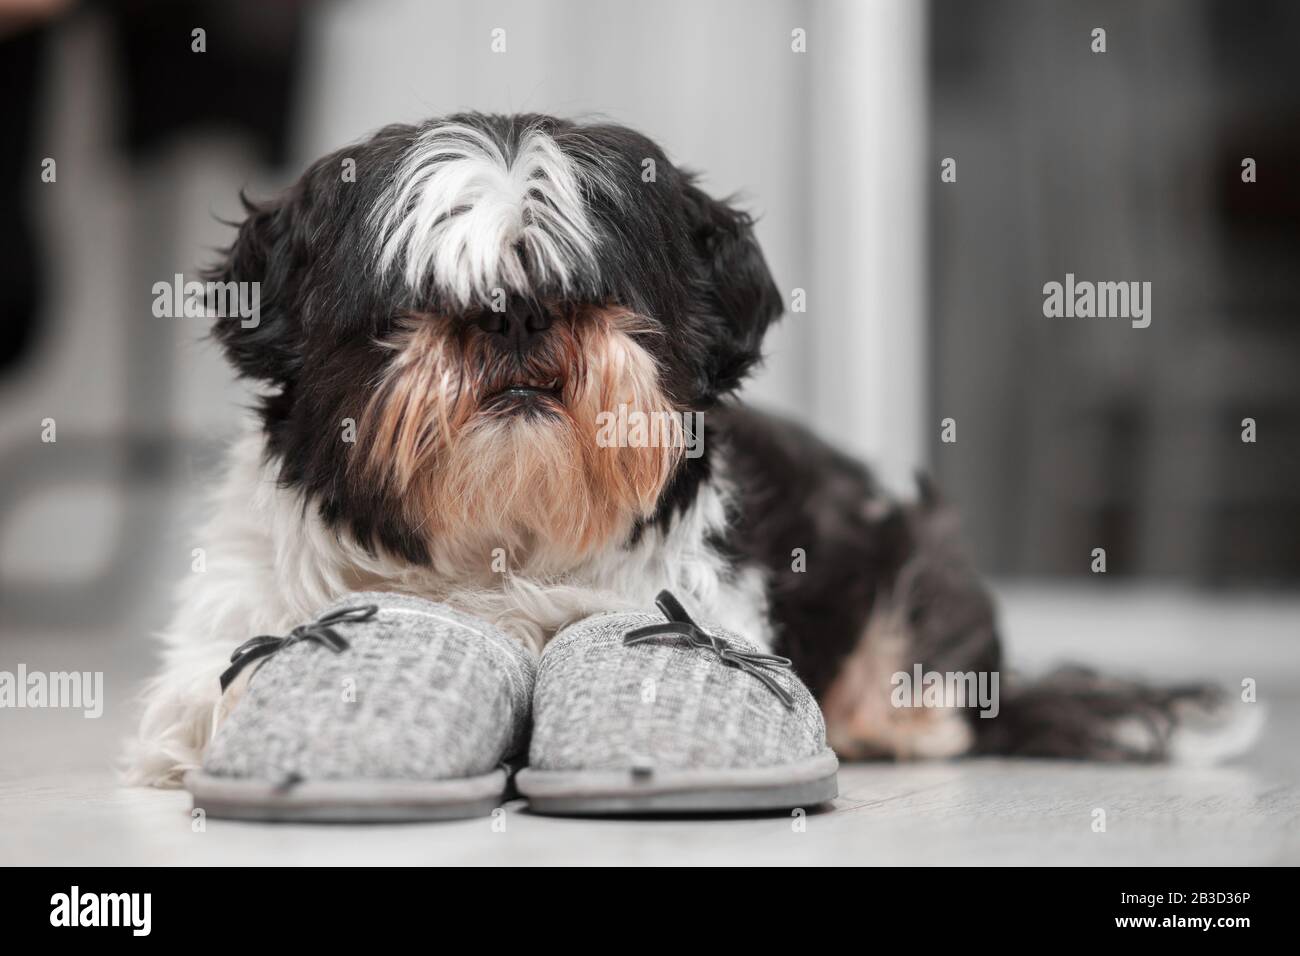 Funny dog, Shih Tzu breed. Sits on a white floor near home slippers. Stock Photo